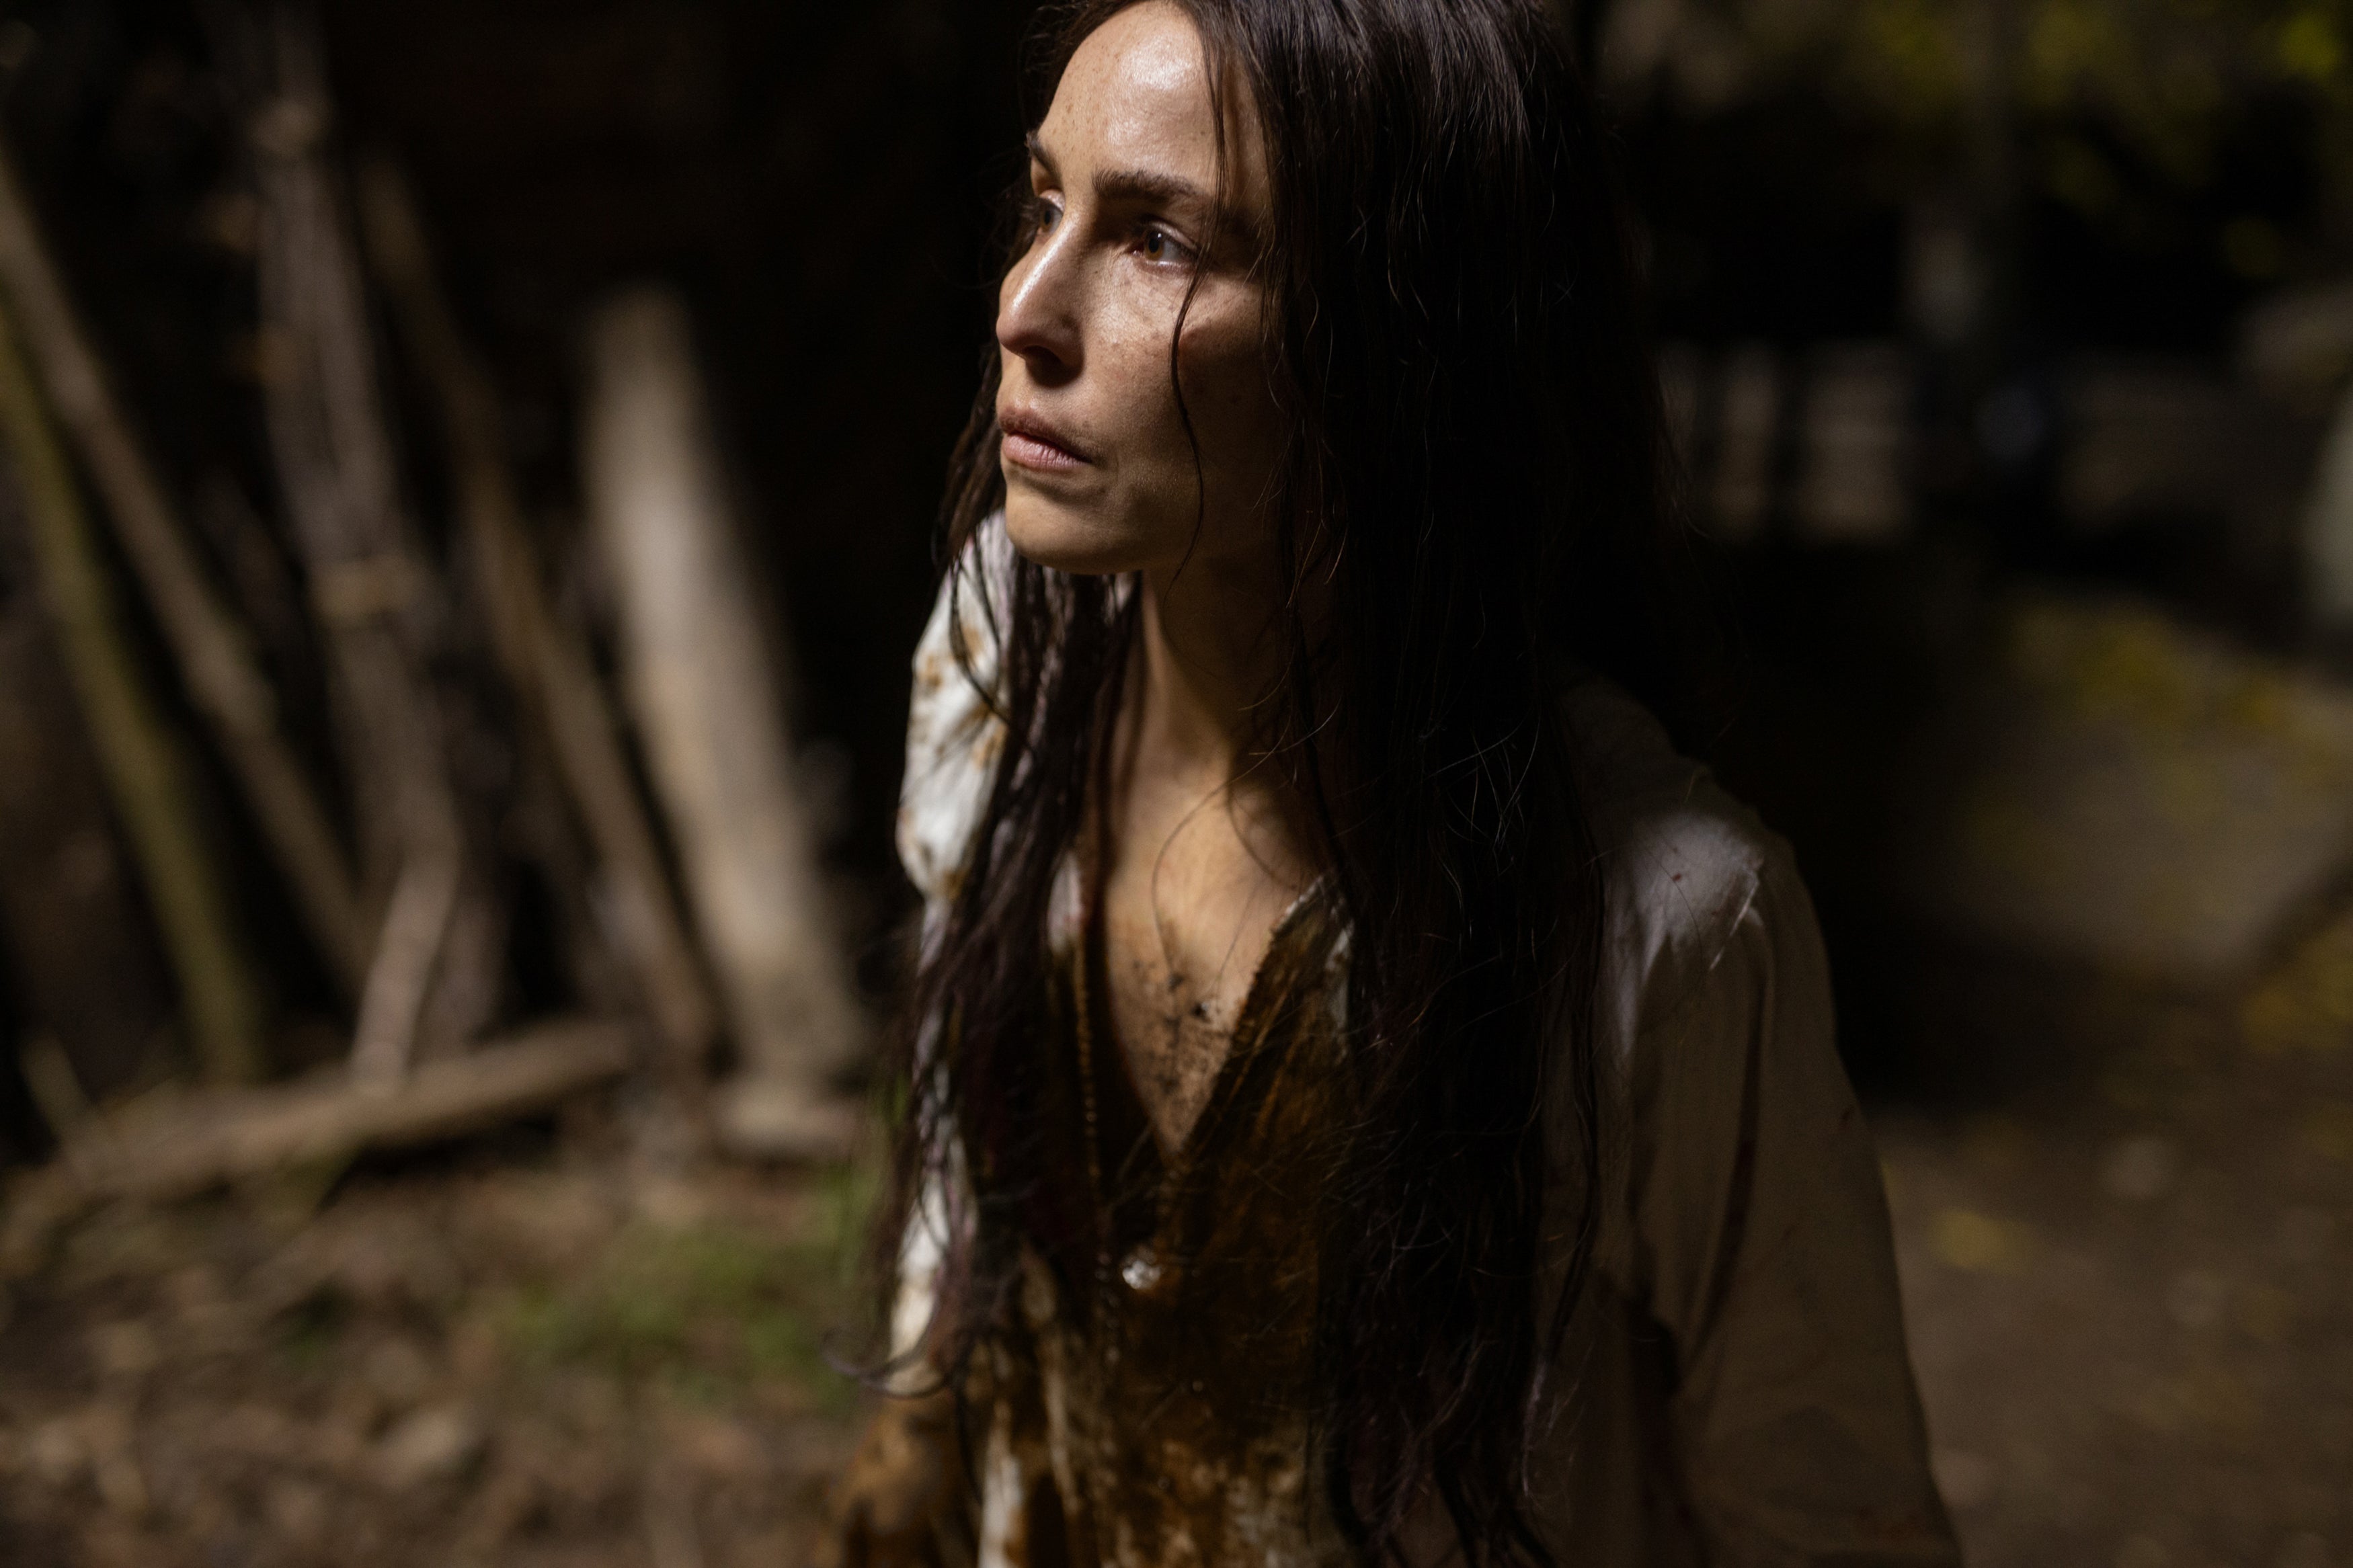 Bosilka (Noomi Rapace) faces the harsh reality of her new life. (Photo: Branko Starcevic/Focus Features)